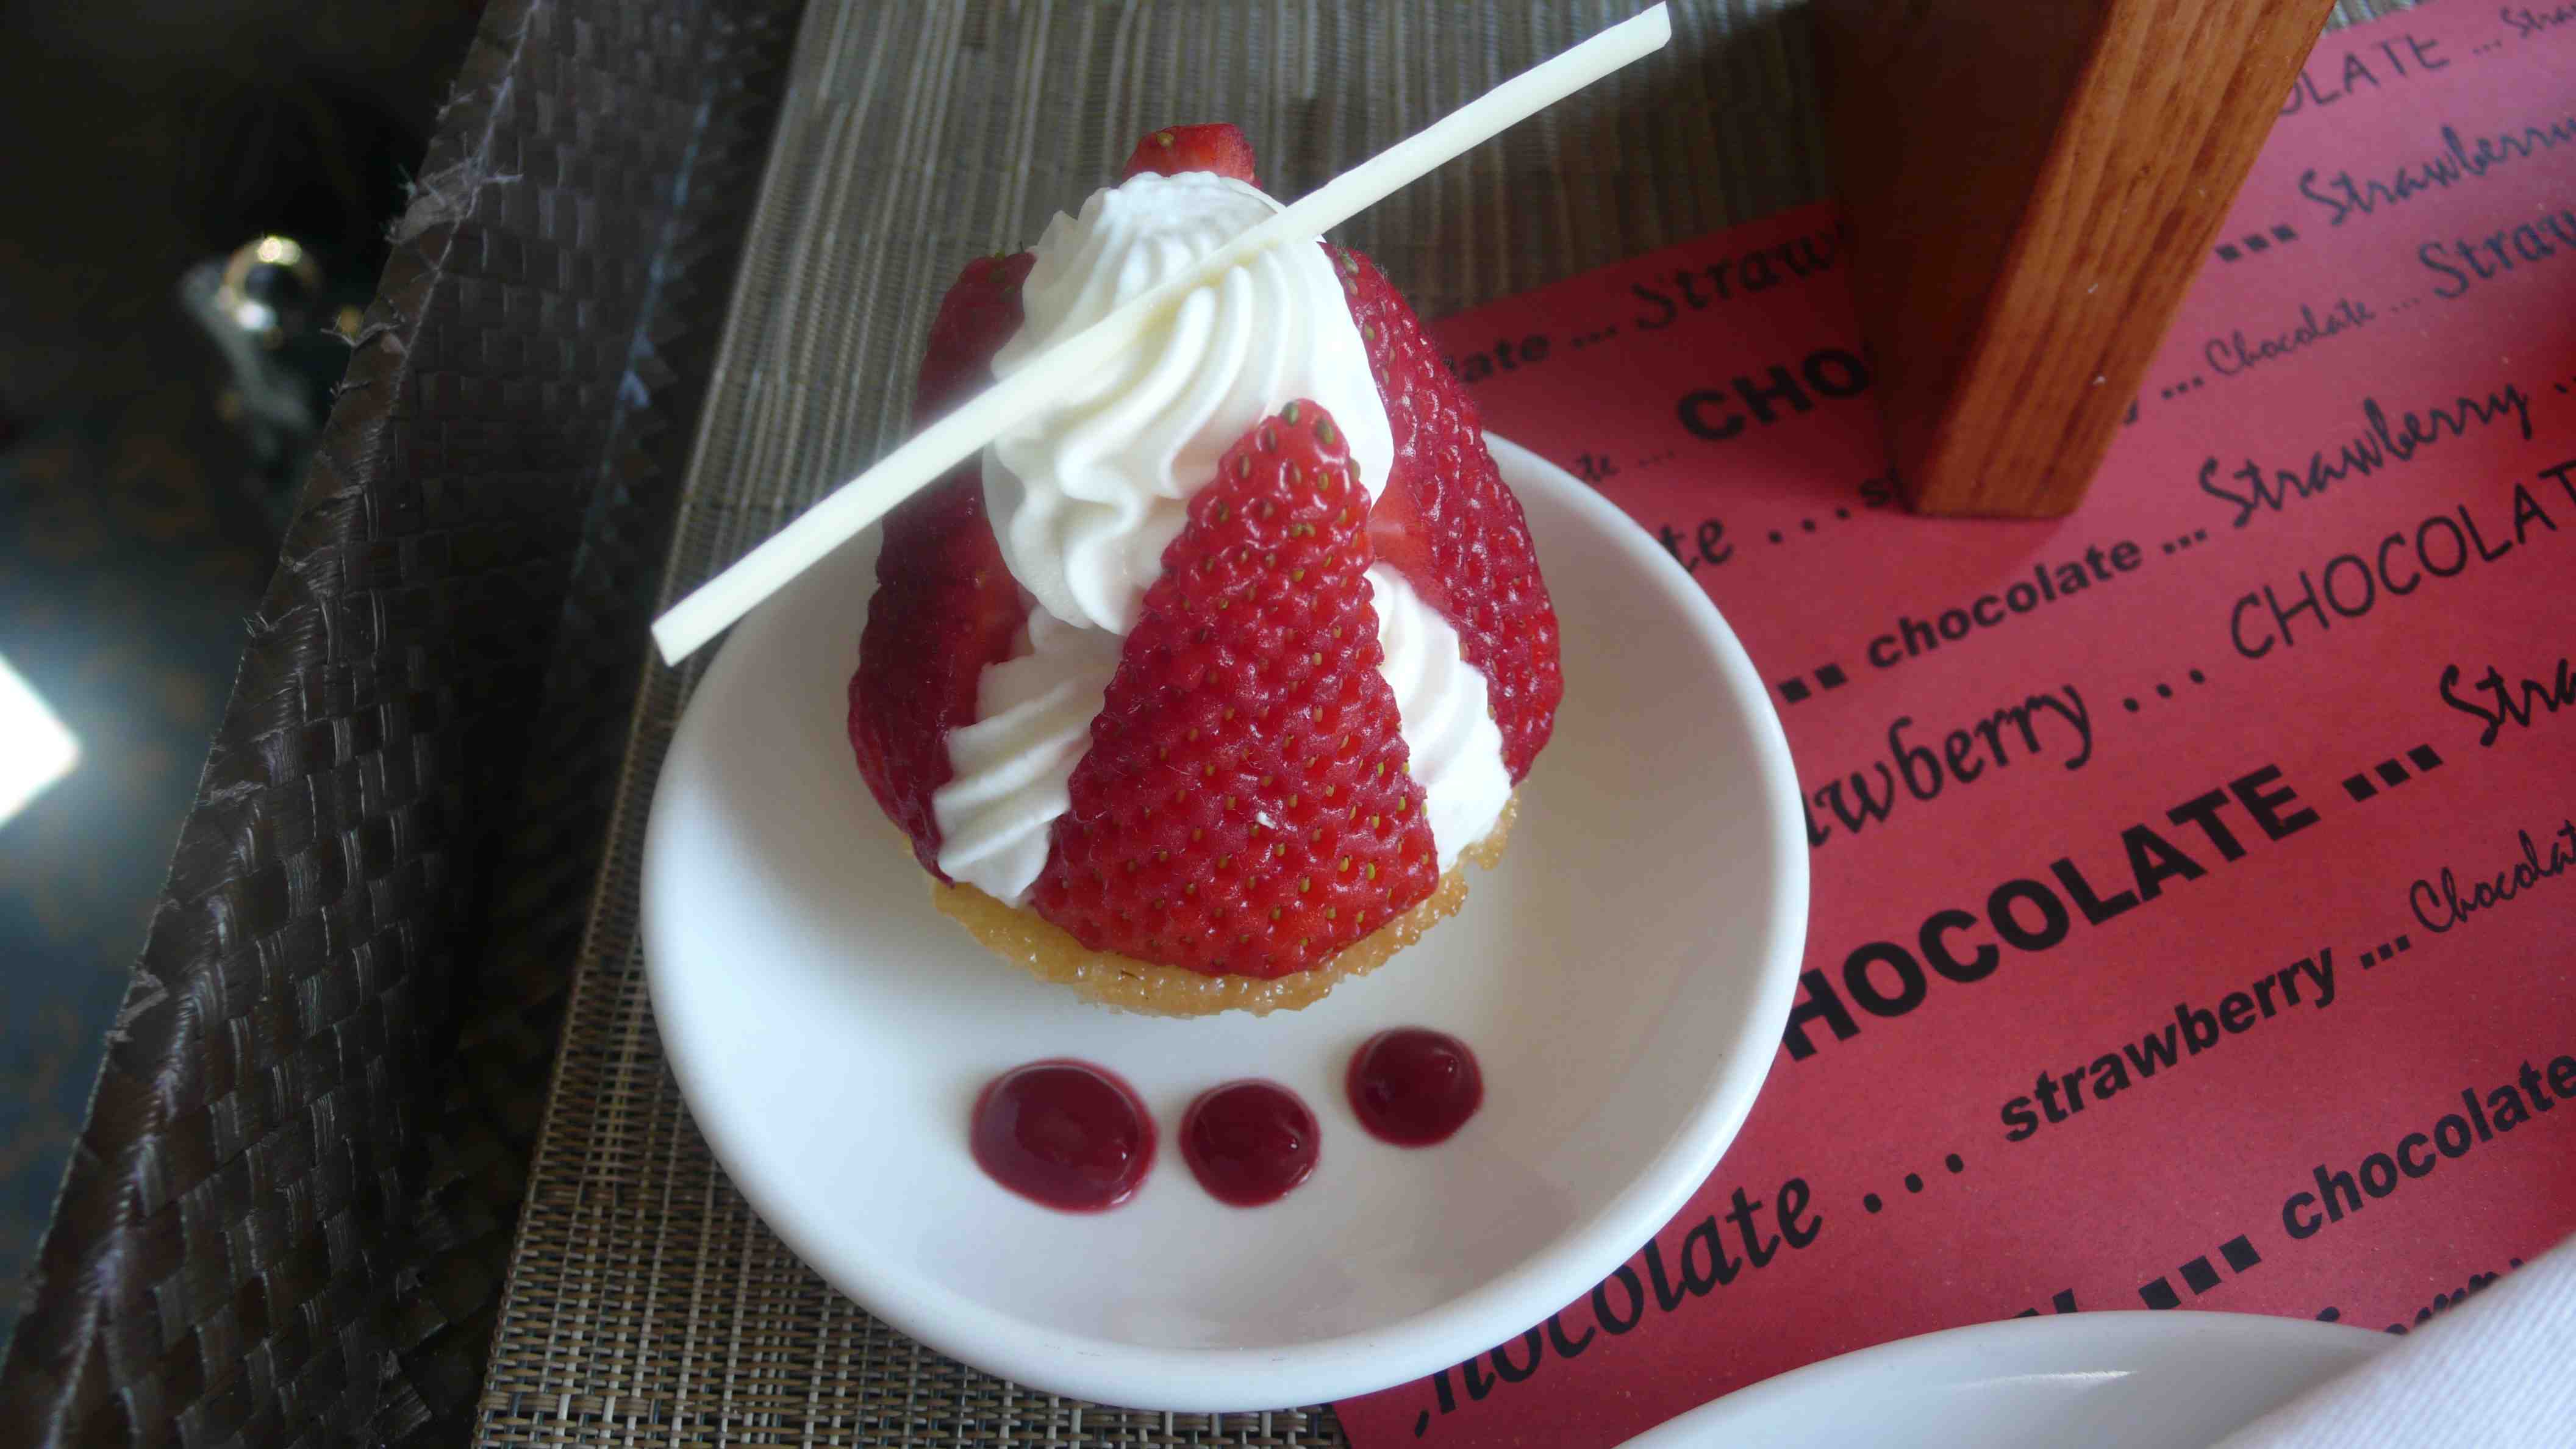 Strawberry from tower, with cream